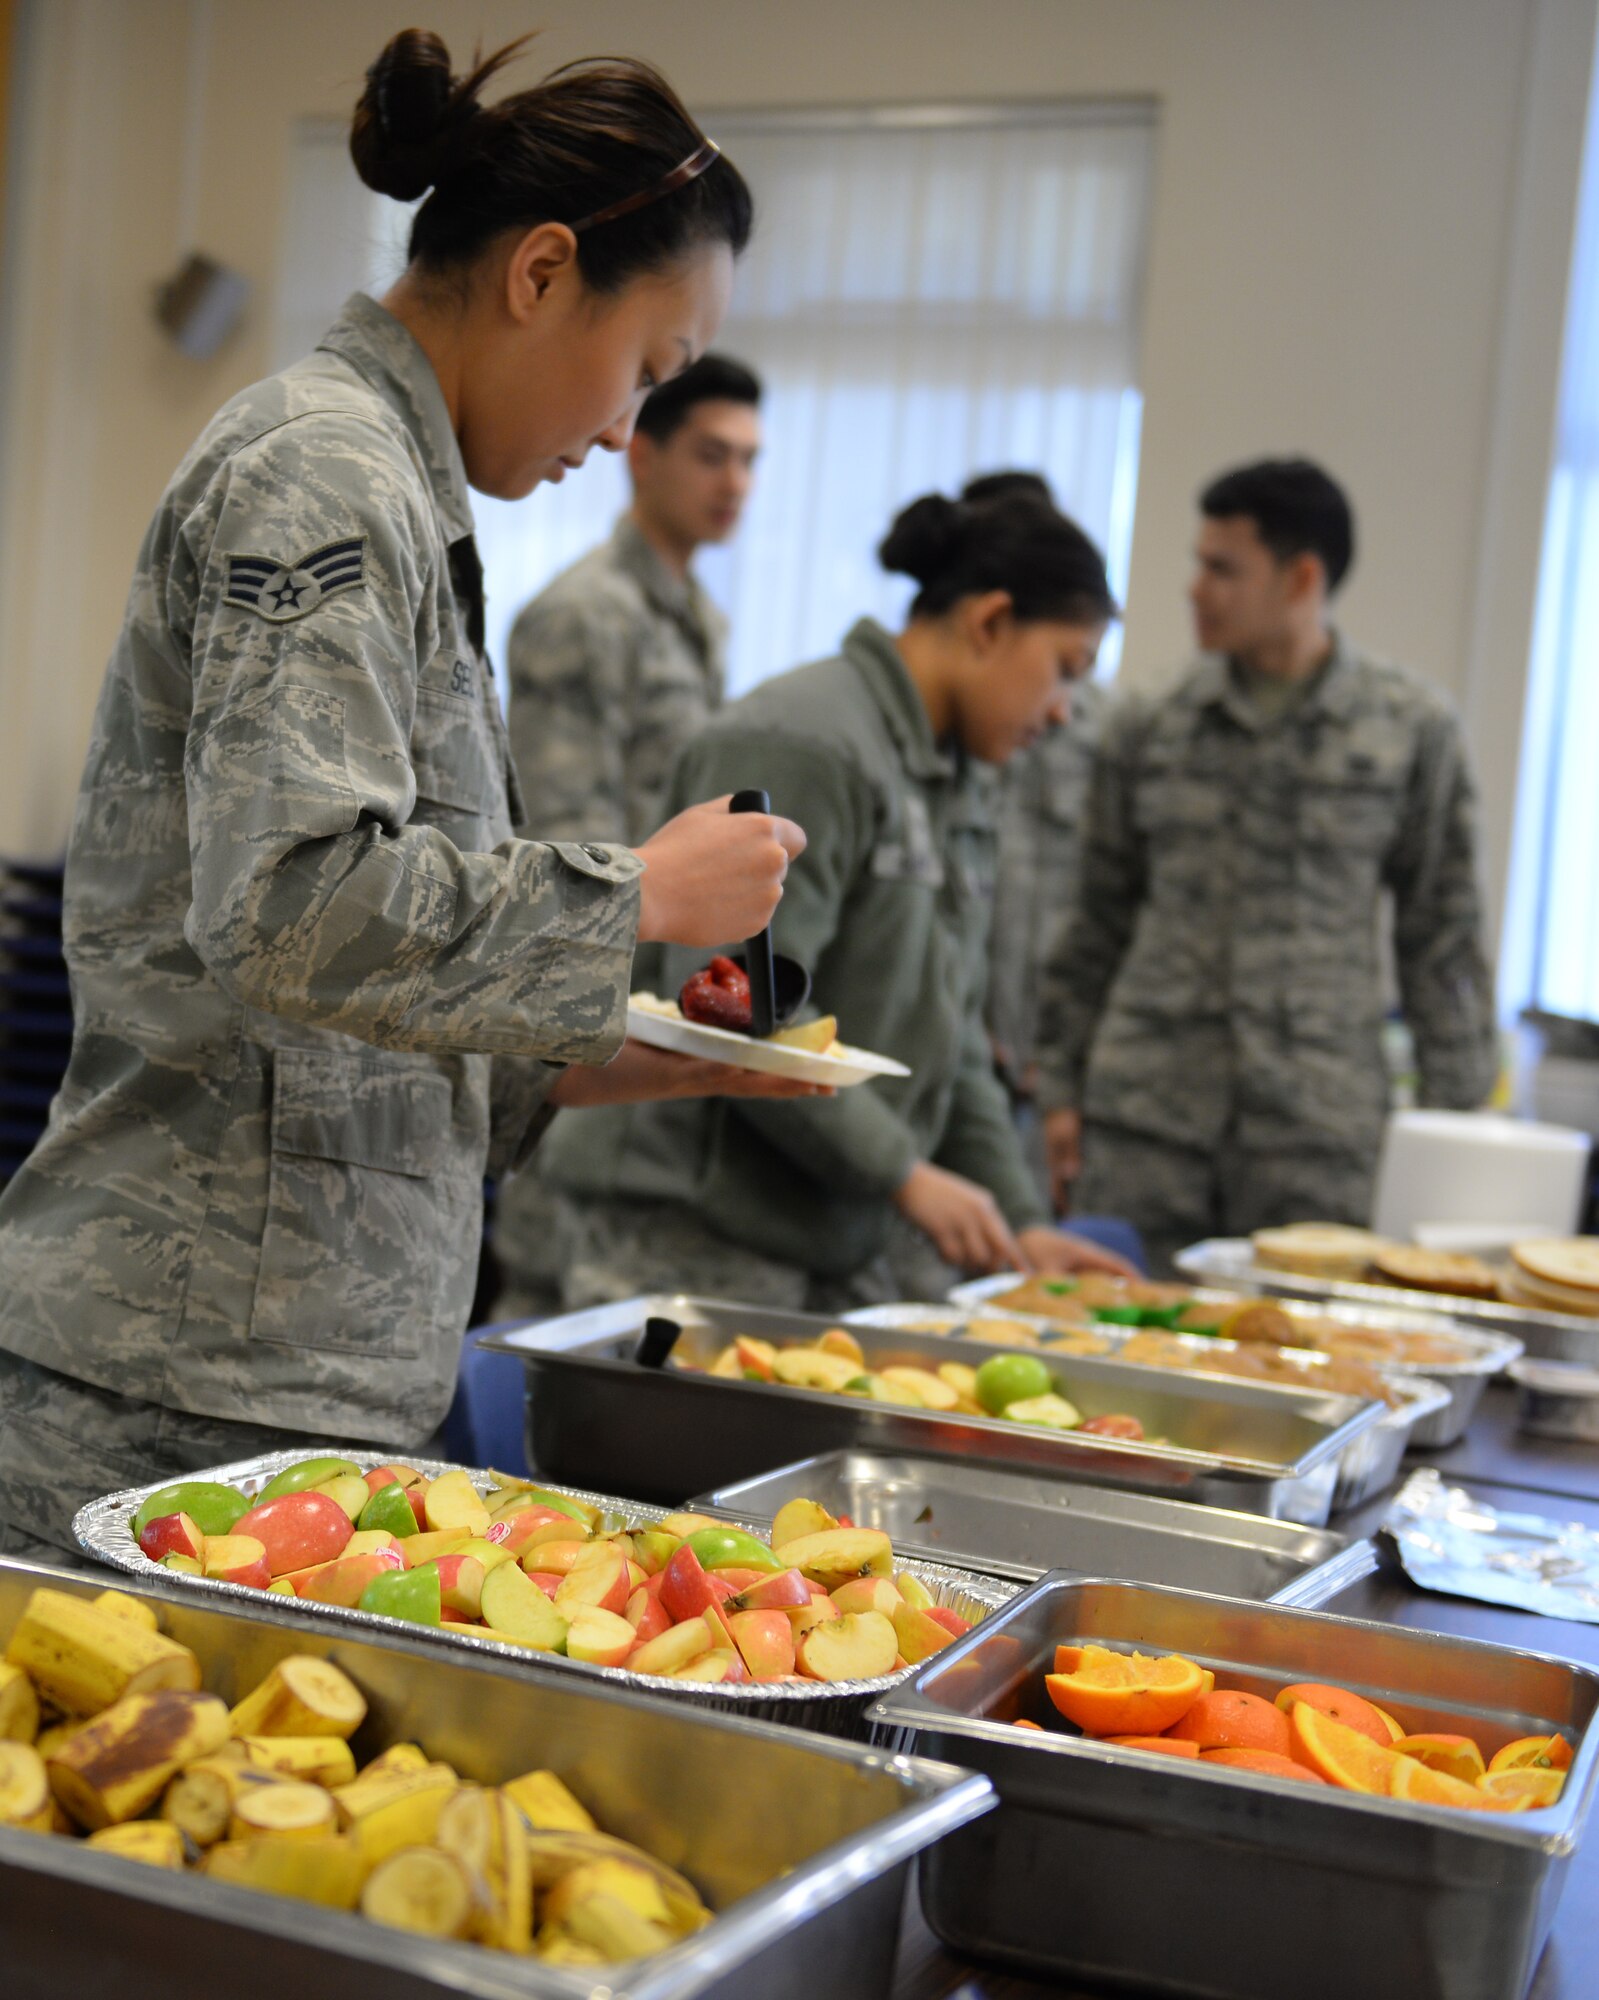 U.S. Air Force Airmen prepare their plates at the base chapel March 21, 2017, on RAF Mildenhall, England. The Airmen Committed to Excellence council hosted a free breakfast for Team Mildenhall’s Airmen. The ACE council enables Airmen the opportunity to give back to military and local communities through community service. (U.S. Air Force photo by Staff Sgt. Micaiah Anthony)